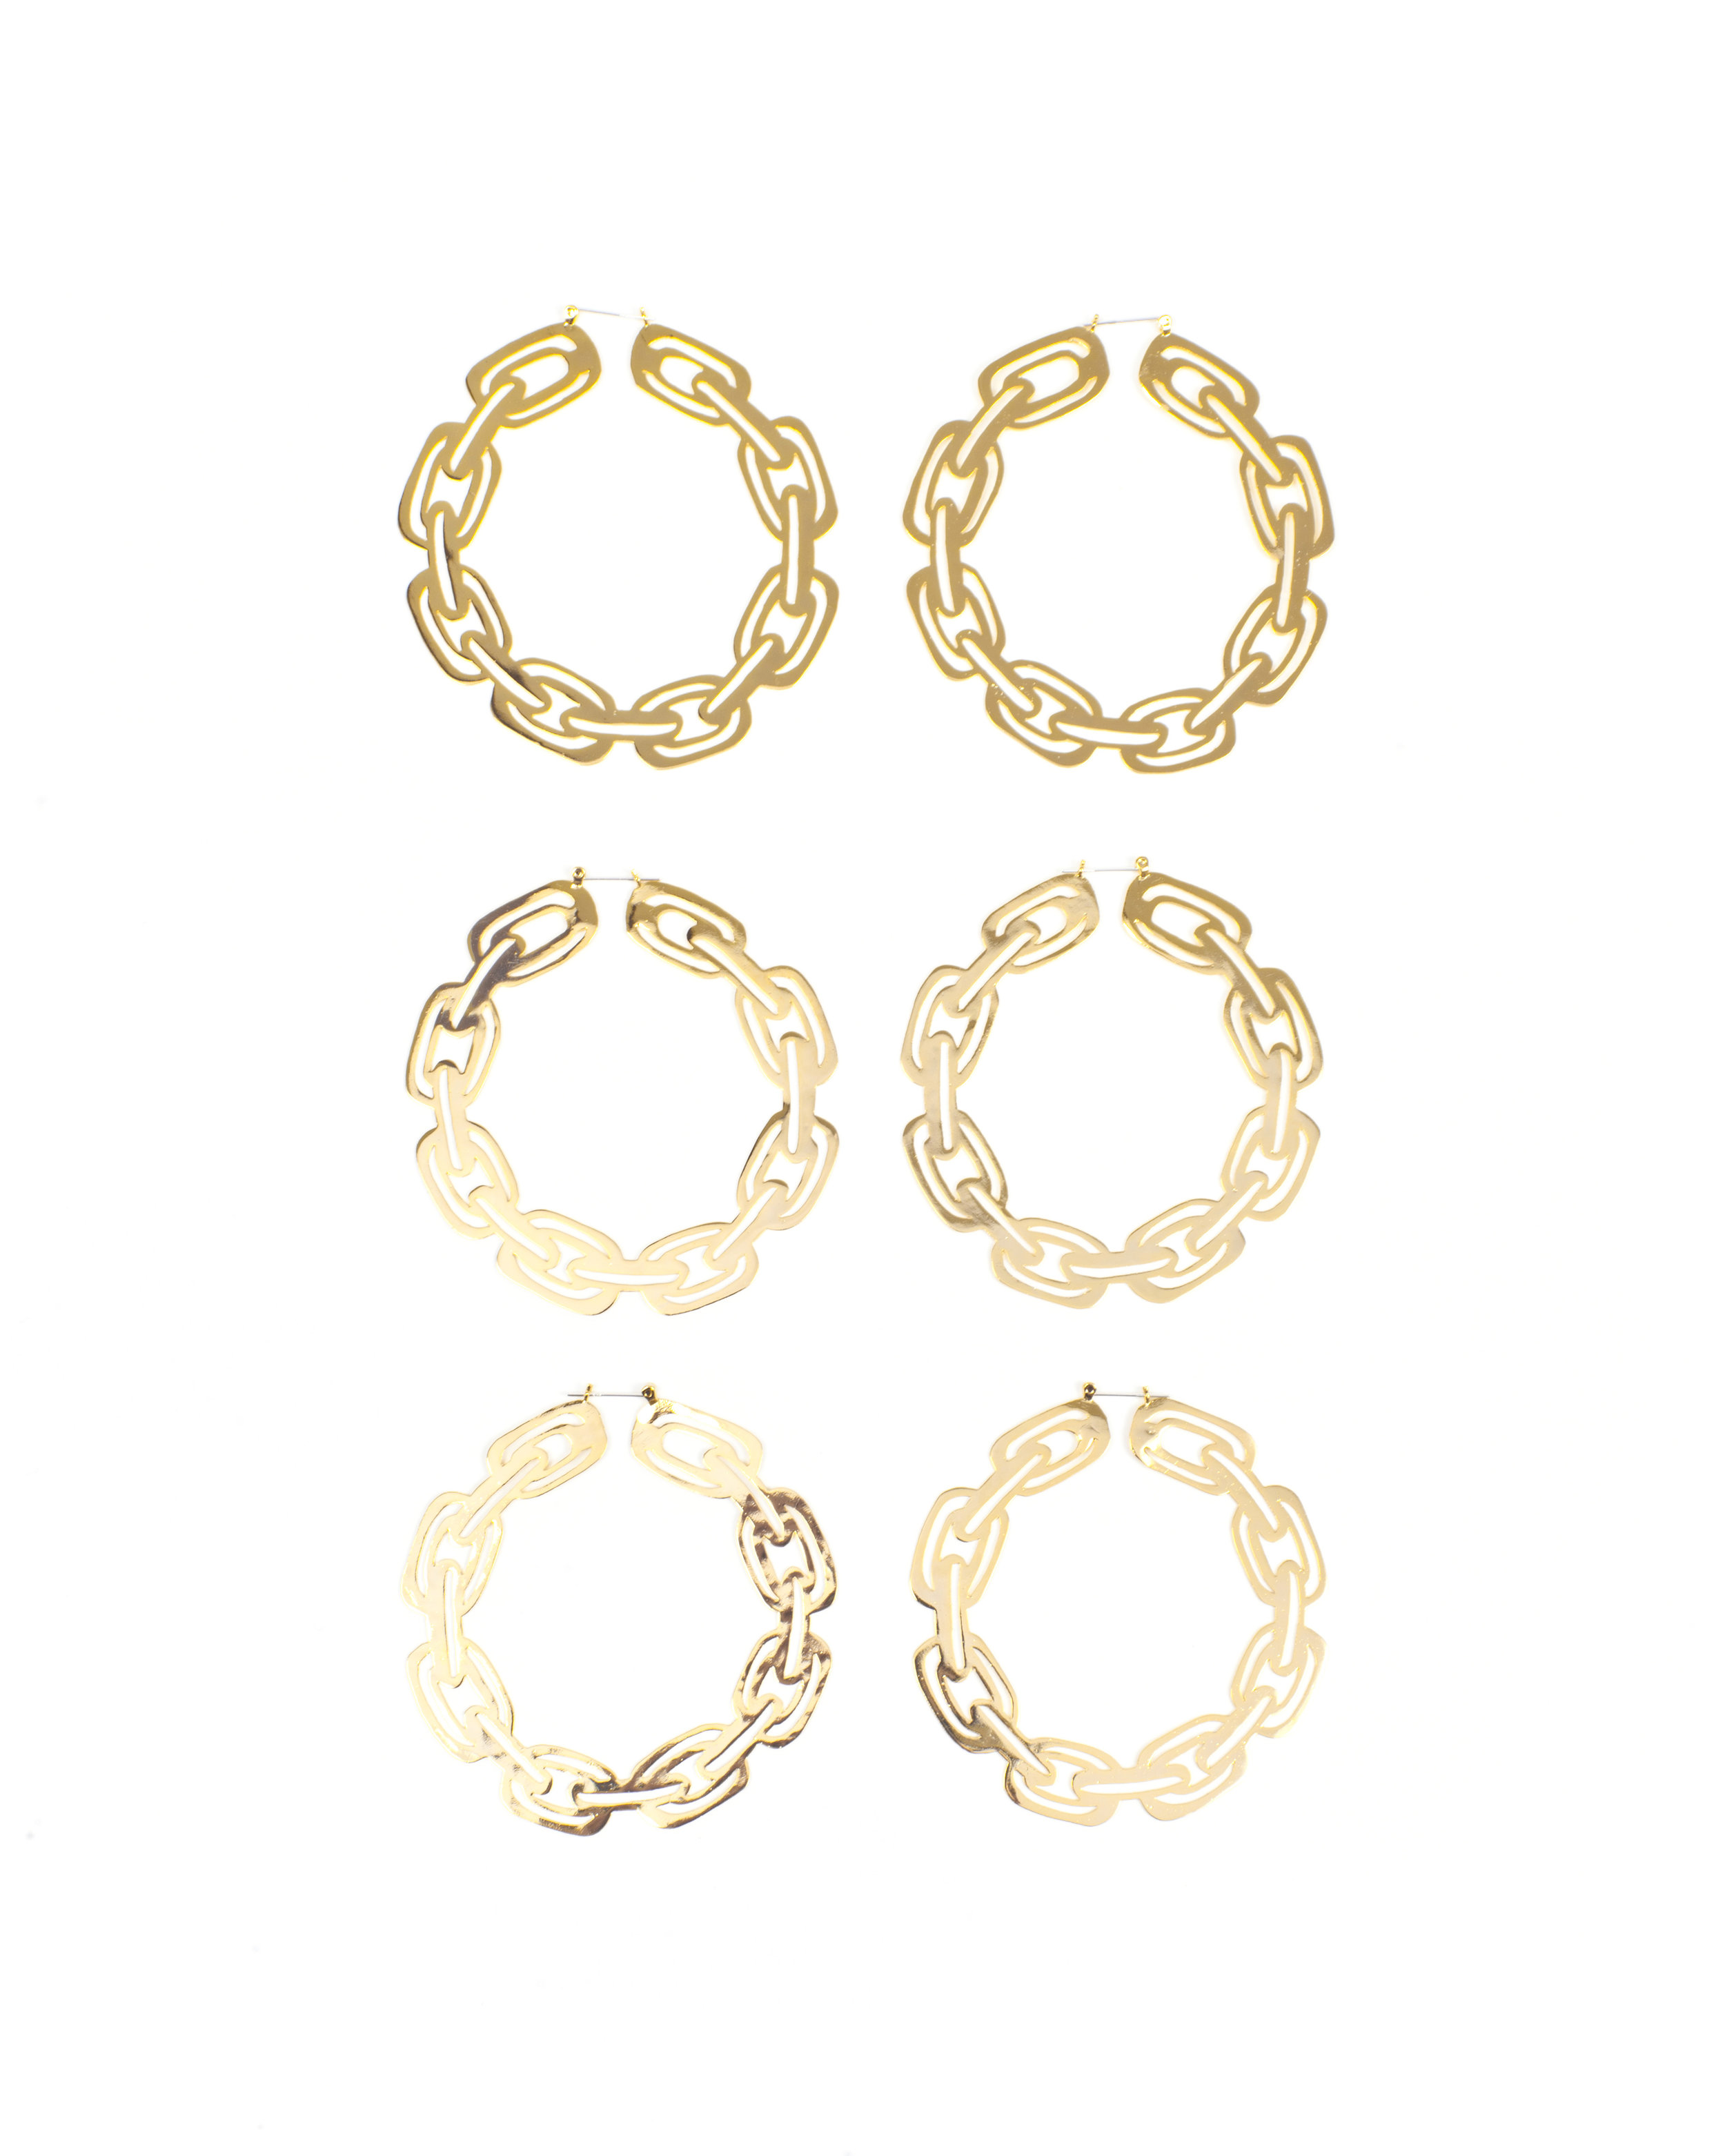   Gold Chain Hoops   Gold-Plated Brass, Sterling Silver  3”x3”x.25”    Photo by Harry Gould Harvey 